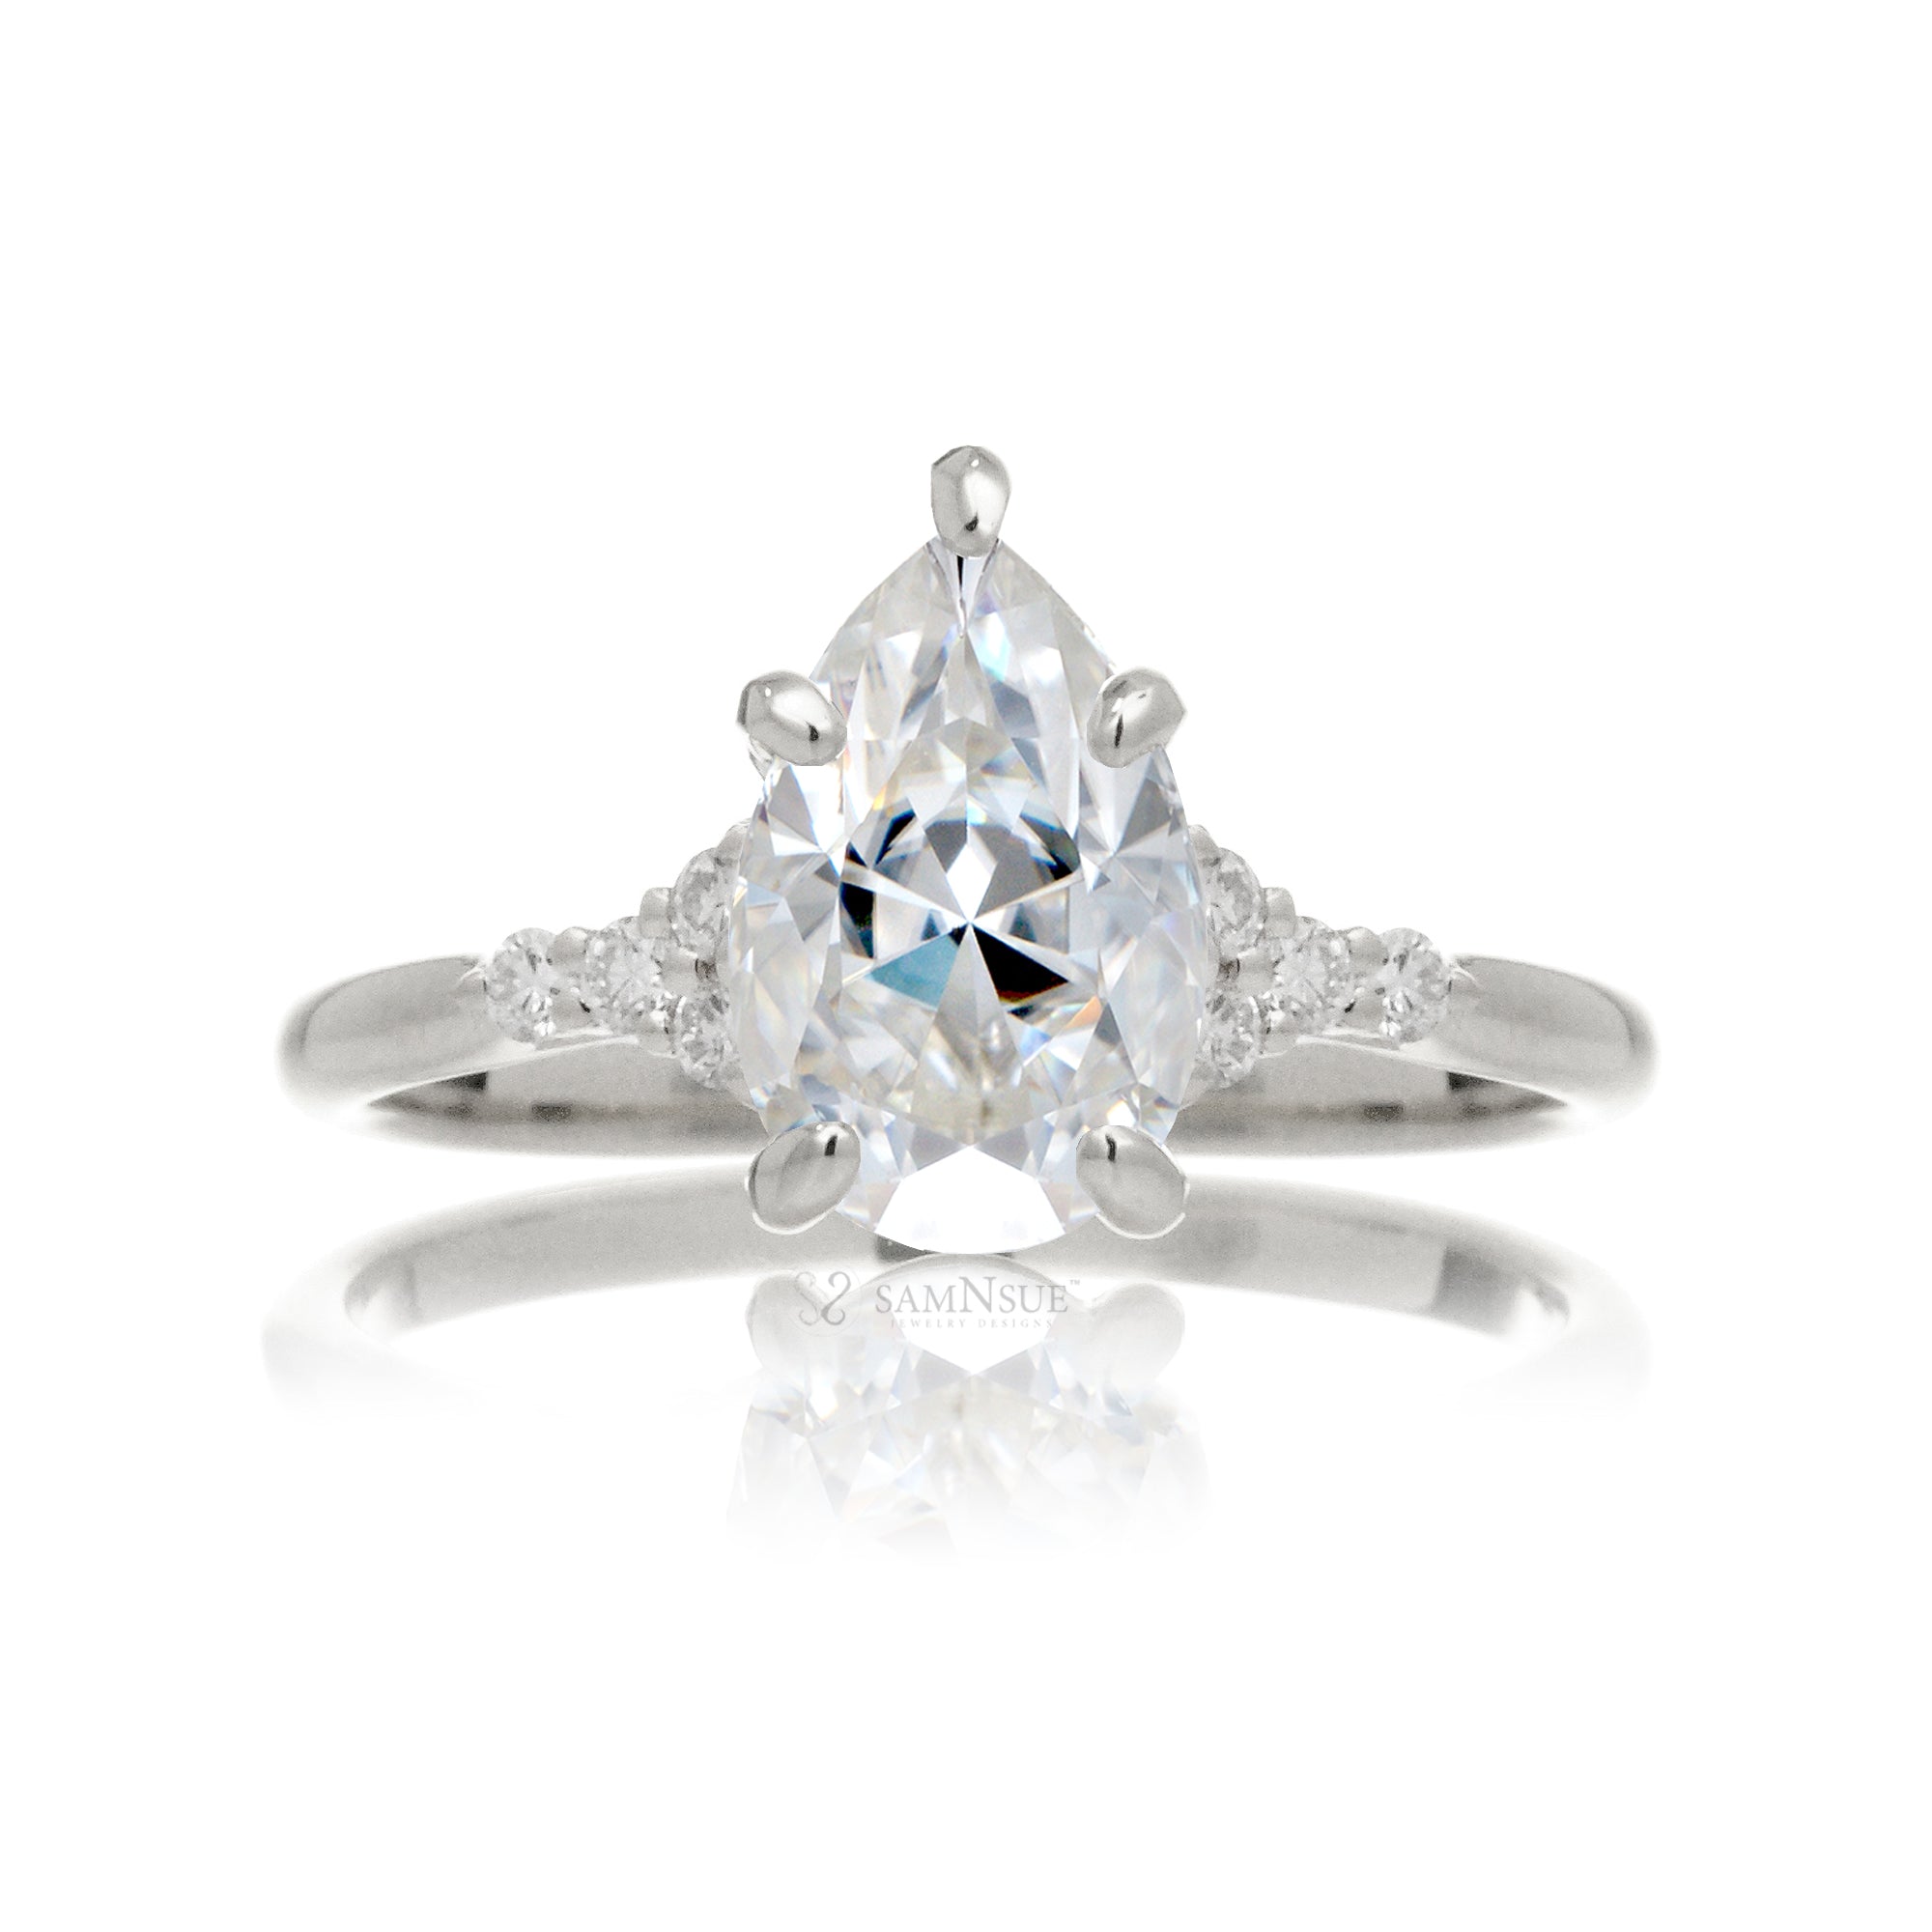  Pear moissanite ring with diamond accent on white gold - the Chloe